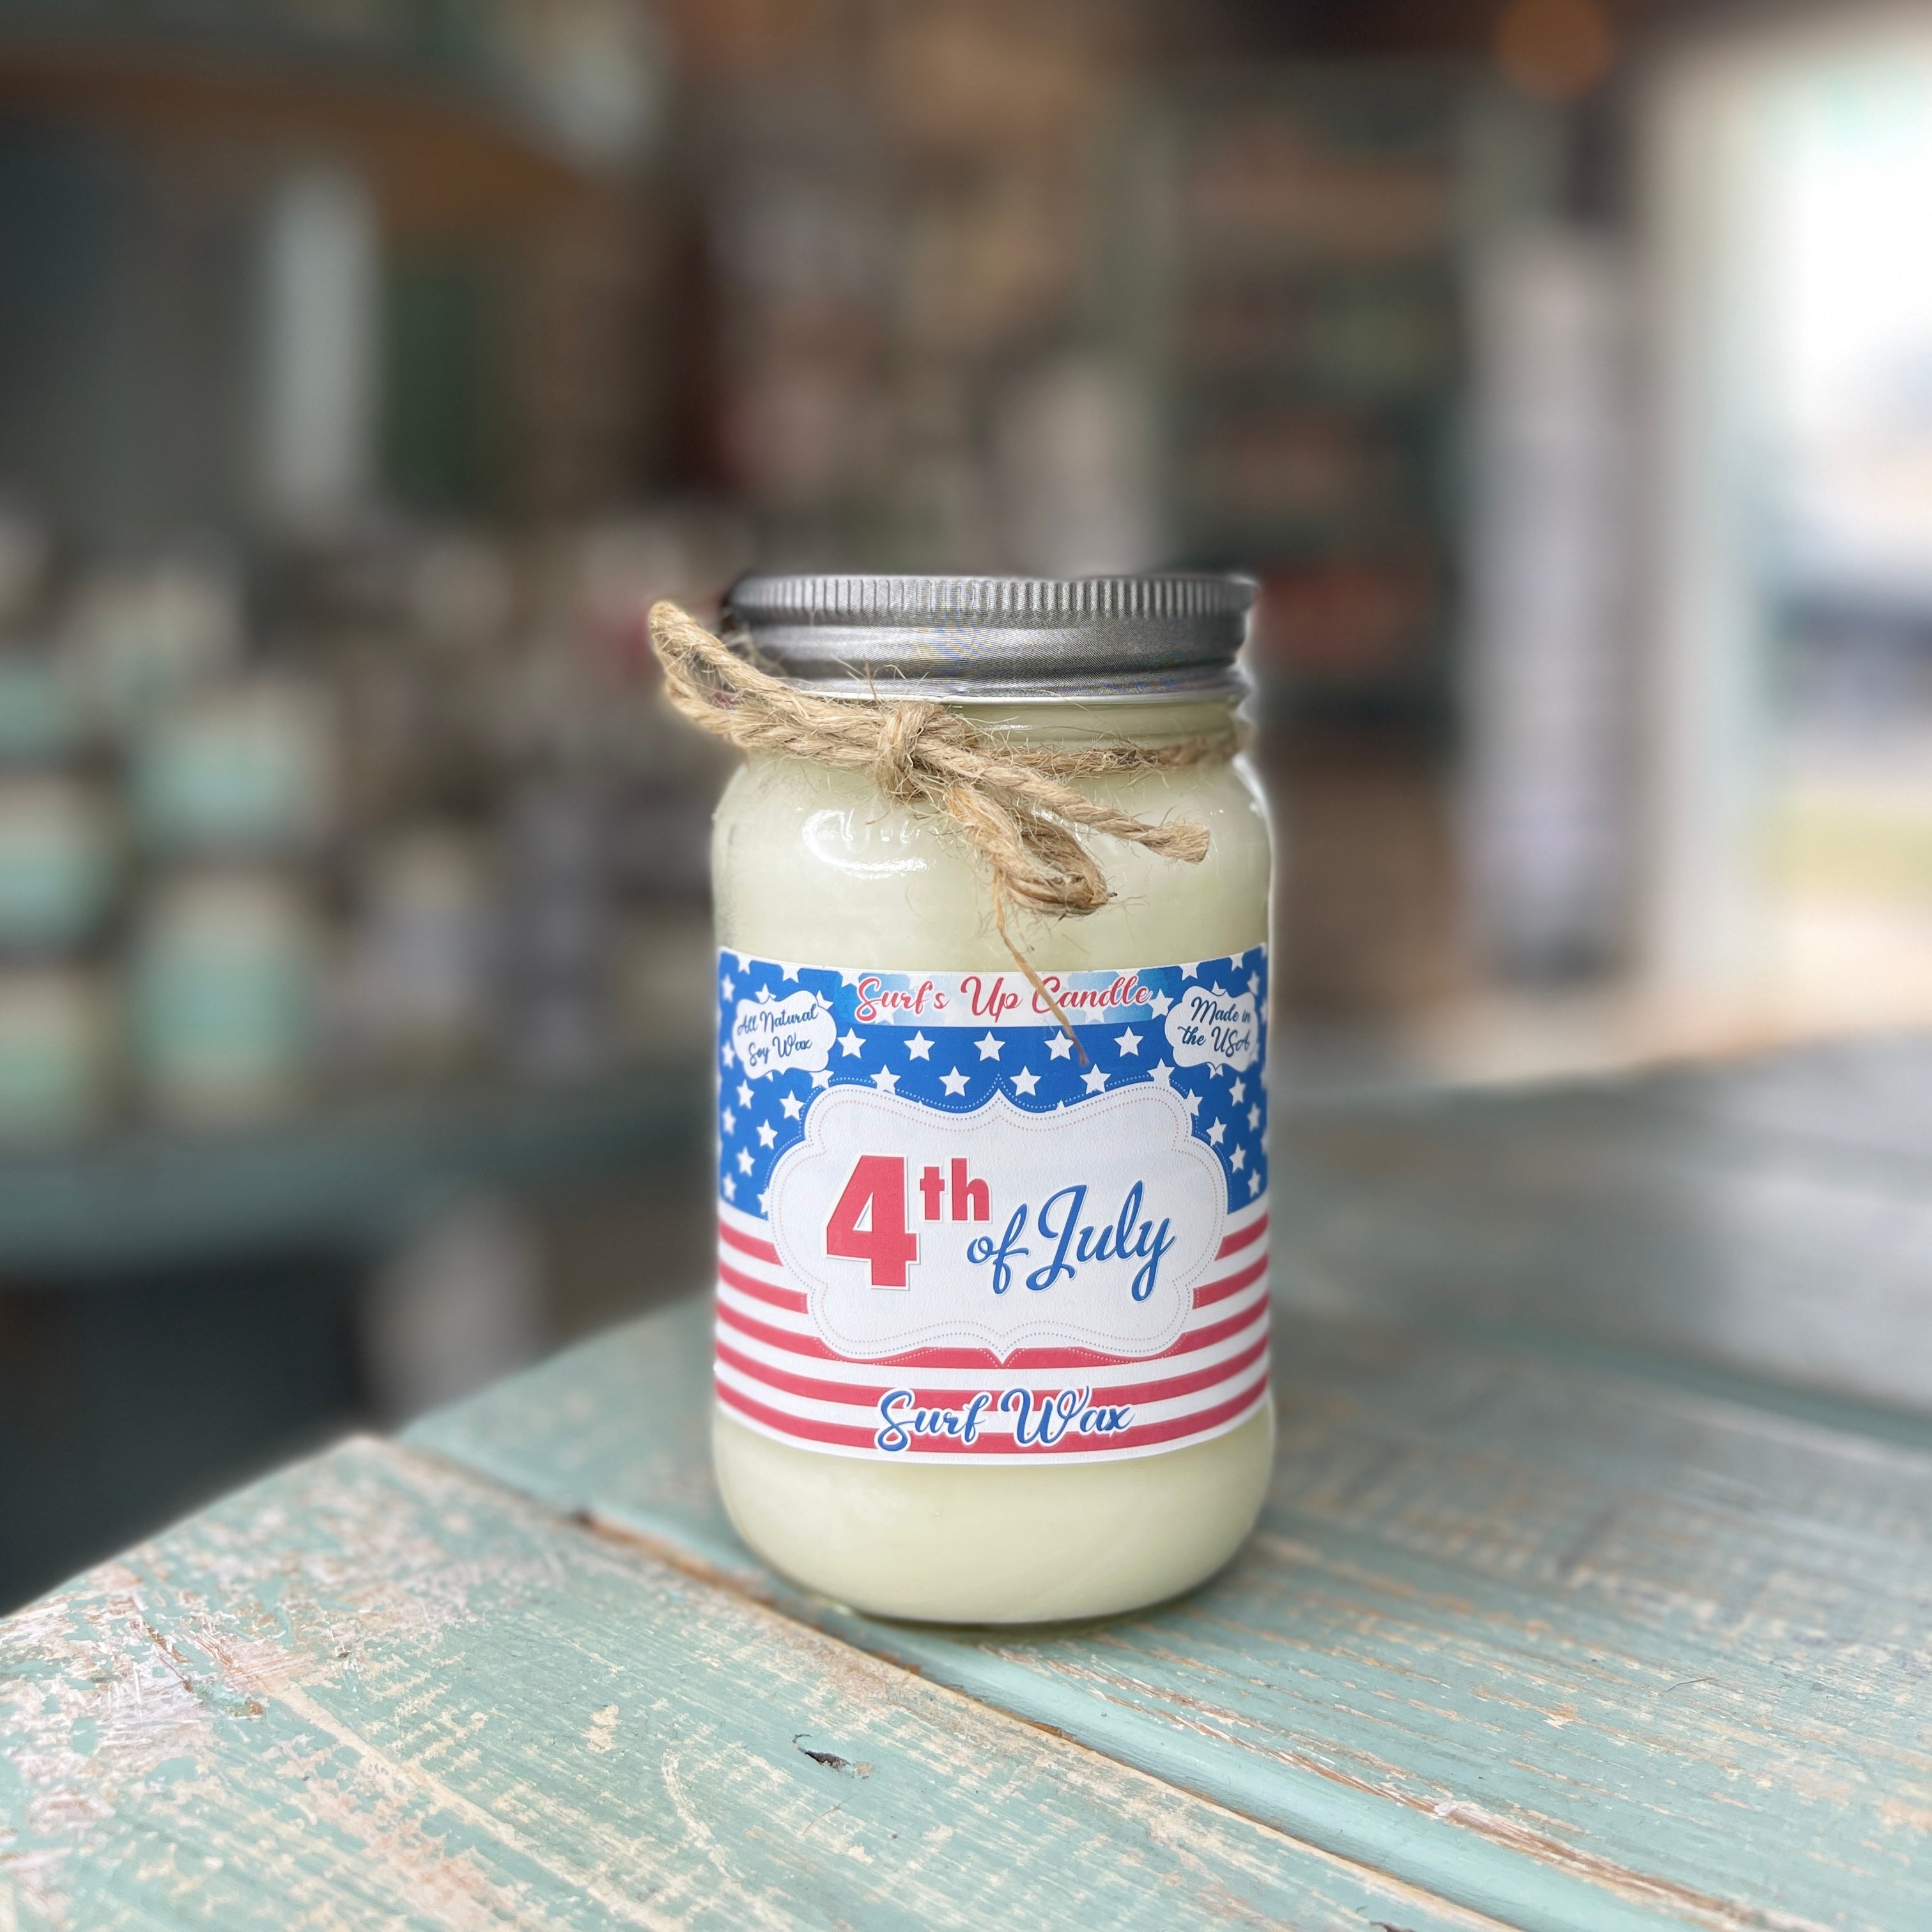 Happy 4th of July Surf Wax Mason Jar Candle - Americana Collection